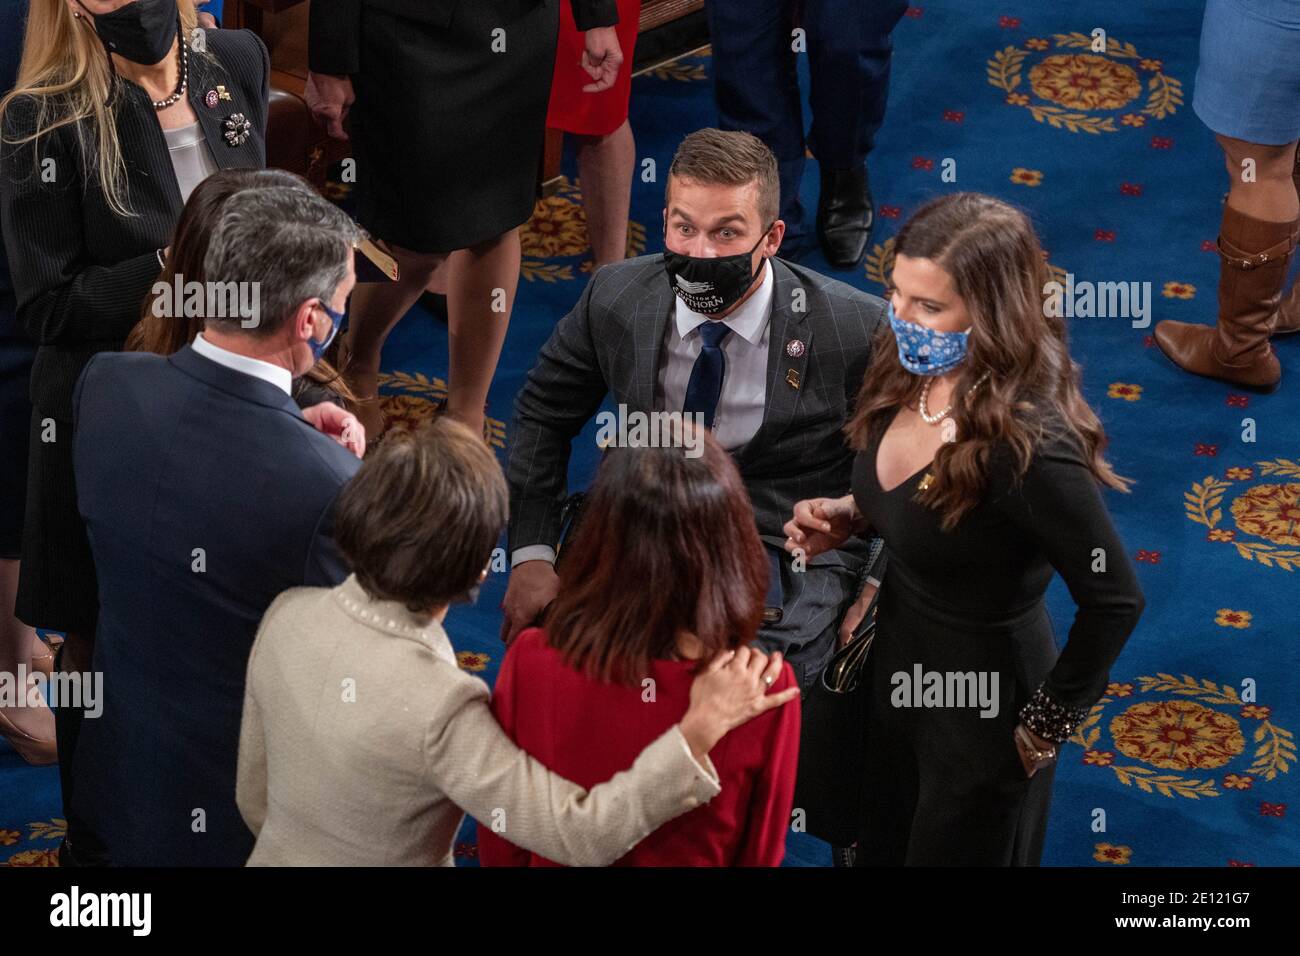 Washington, United States. 03rd Jan, 2021. Representative-elect Madison Cawthorn (R-NC) speaks to others prior to the swearing in of the new 117th Congress on Capitol Hill on January 3, 2021 in Washington DC. Photo by Ken Cedeno/Sipa USA Credit: Sipa USA/Alamy Live News Stock Photo